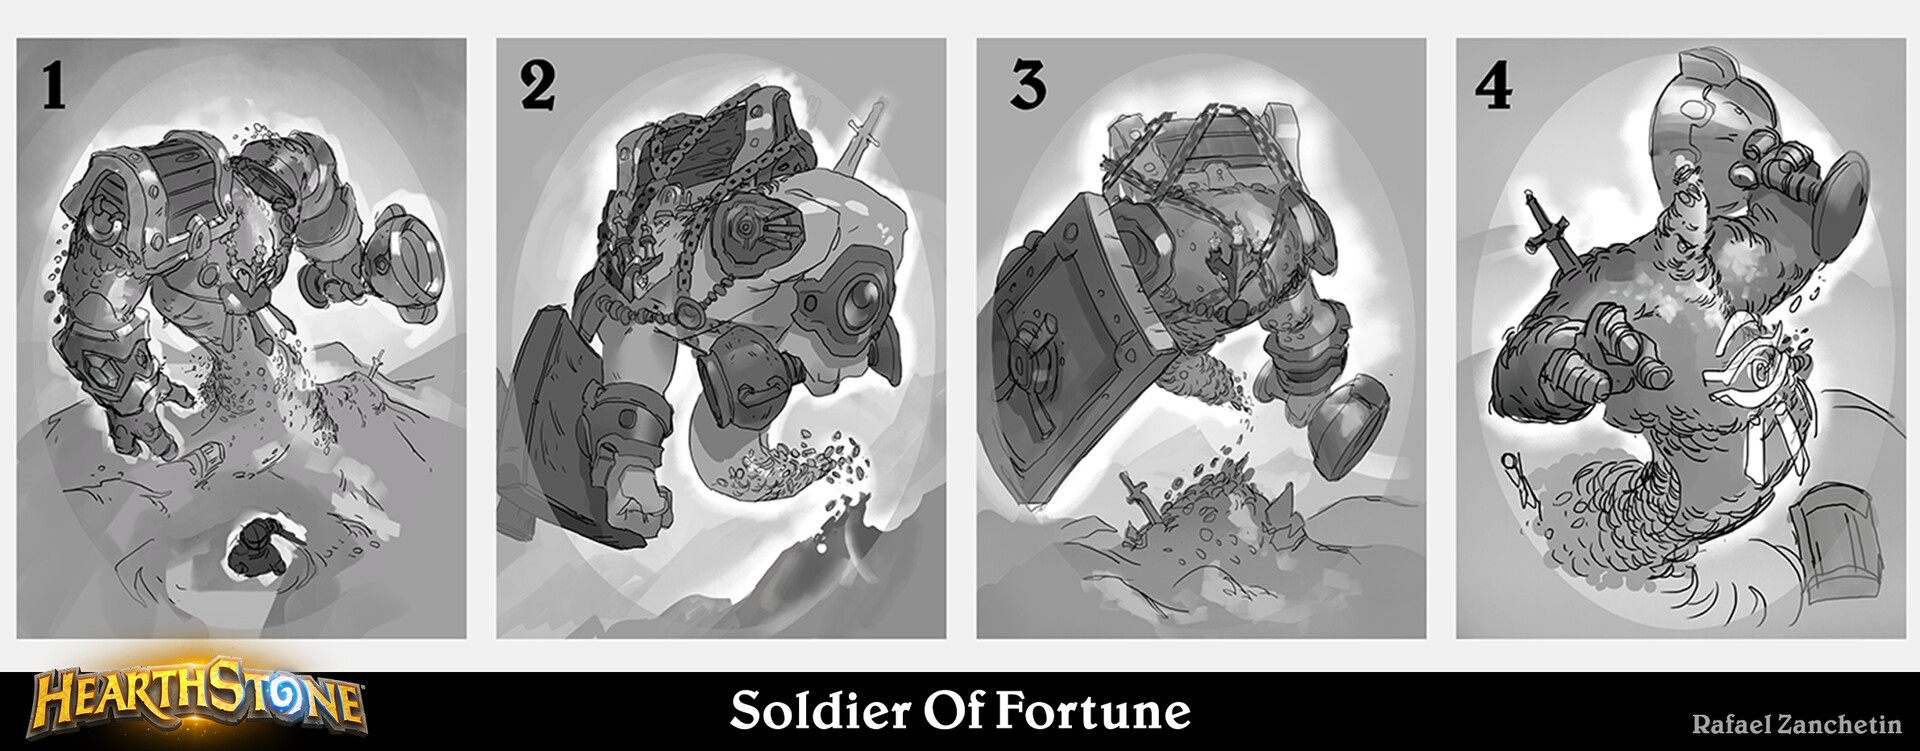 soldier of fortune deck